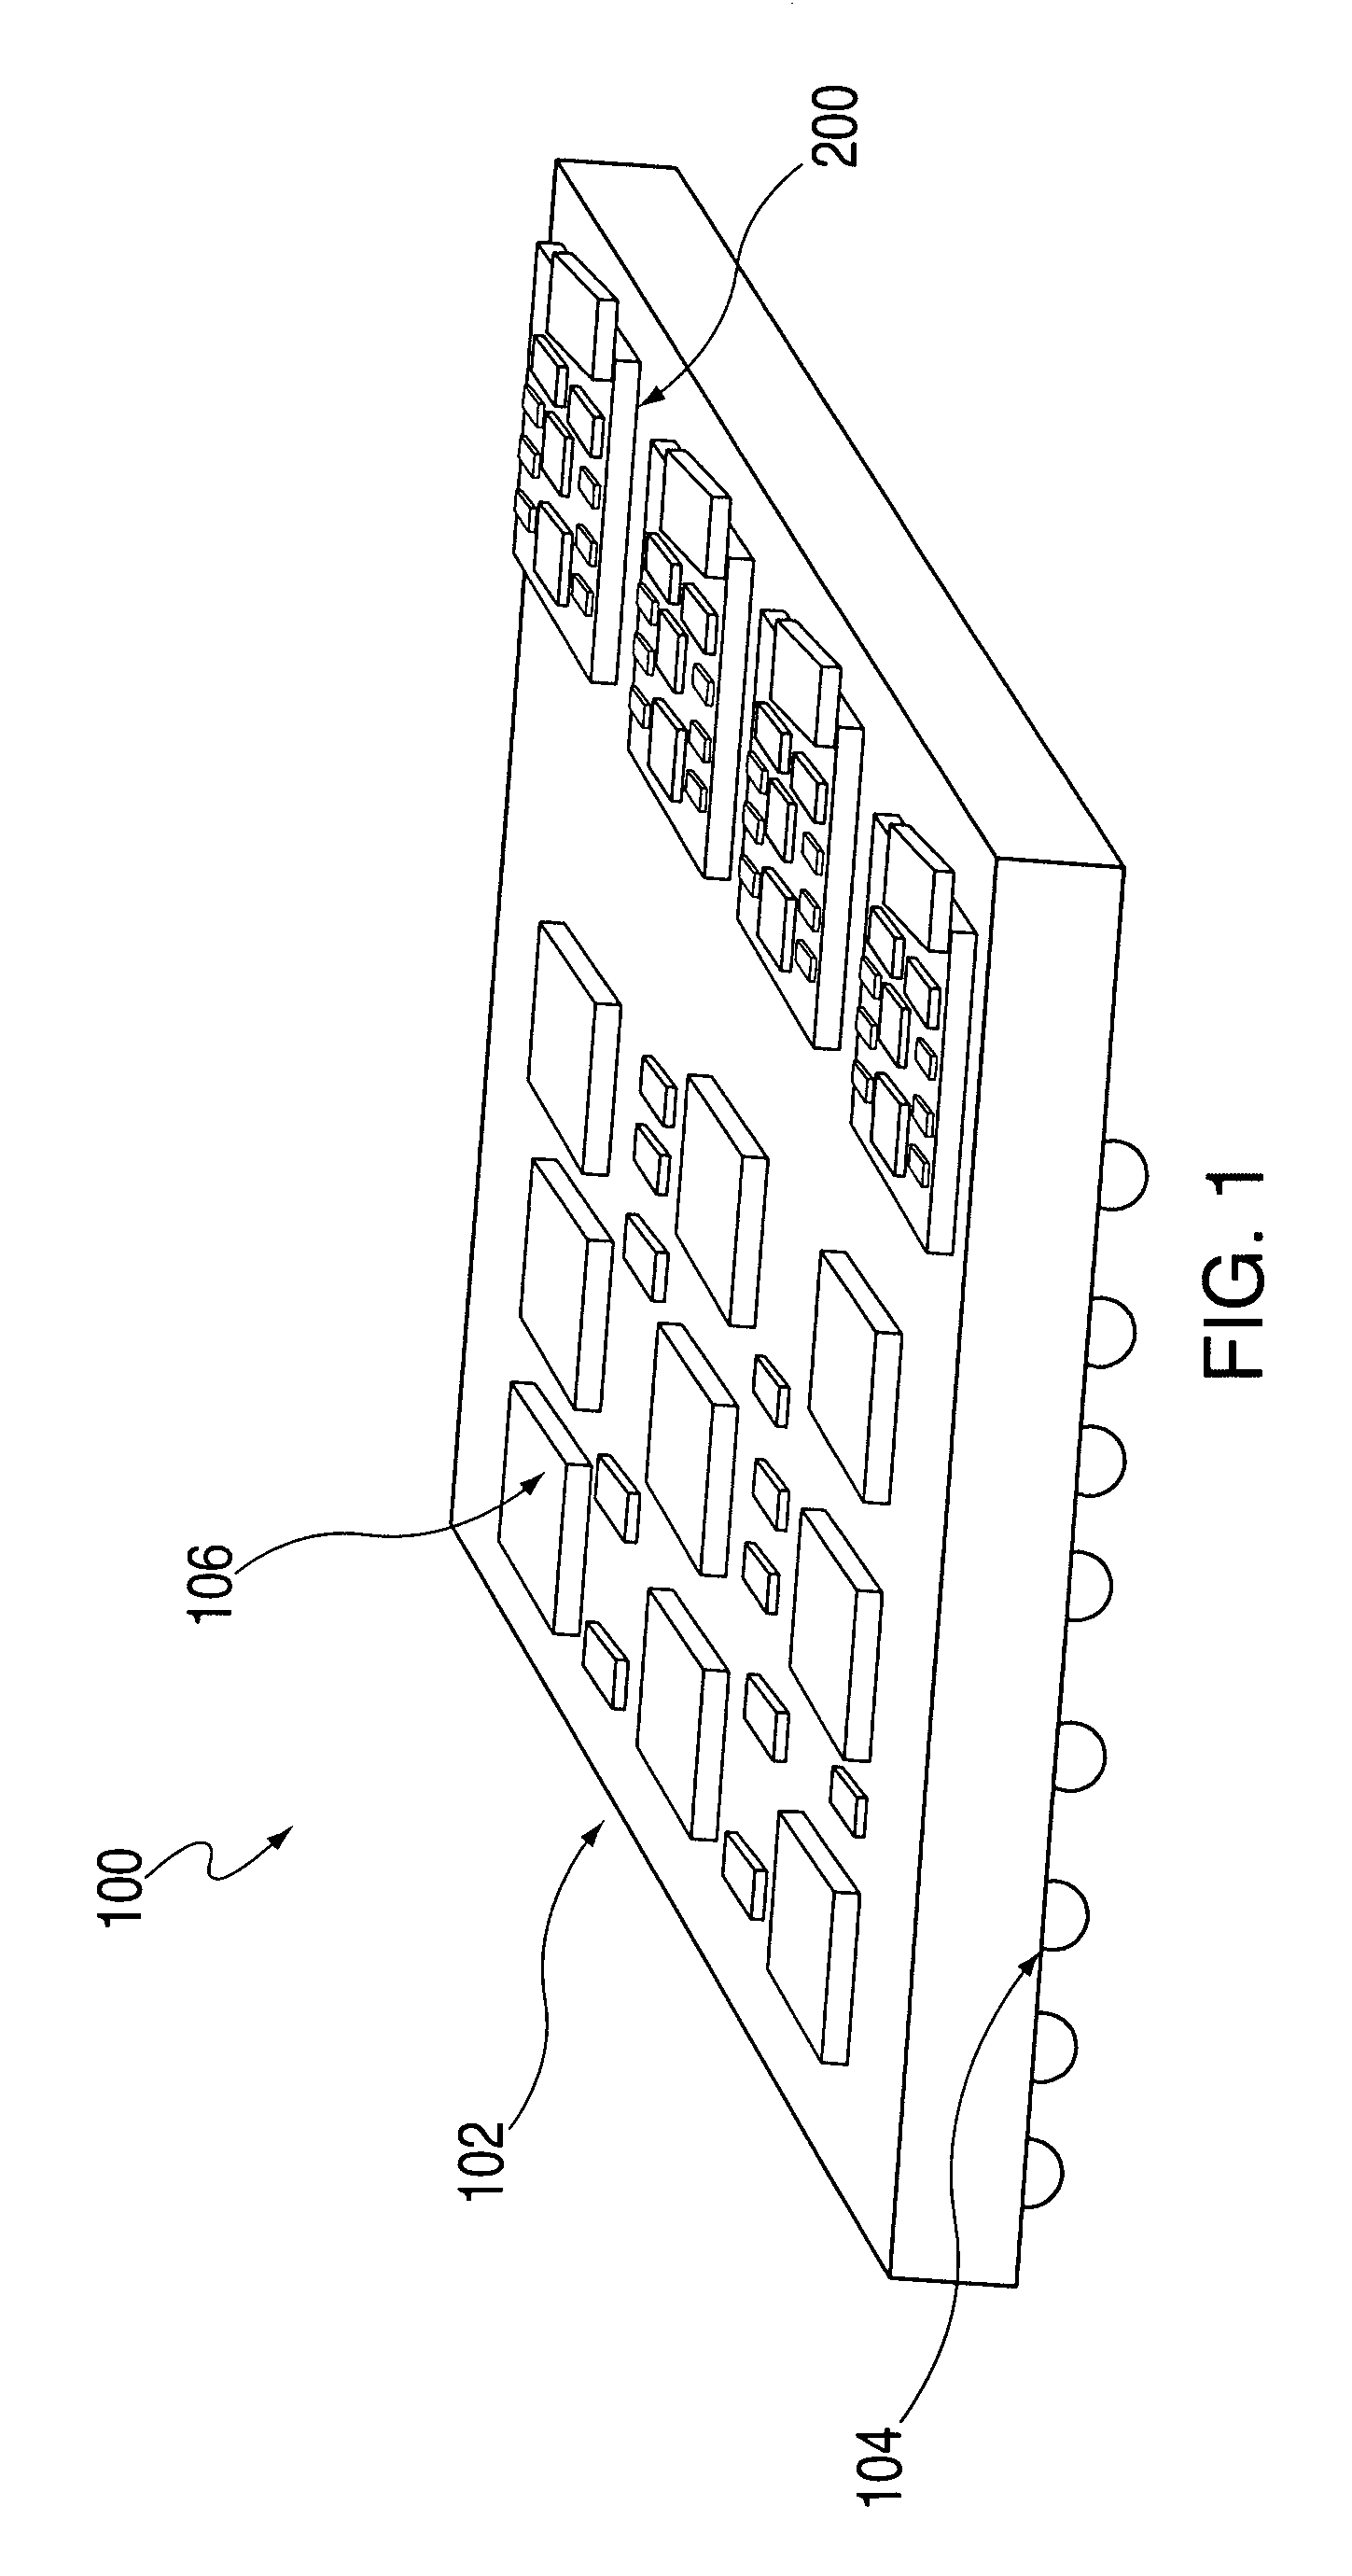 Silicon carrier for optical interconnect modules